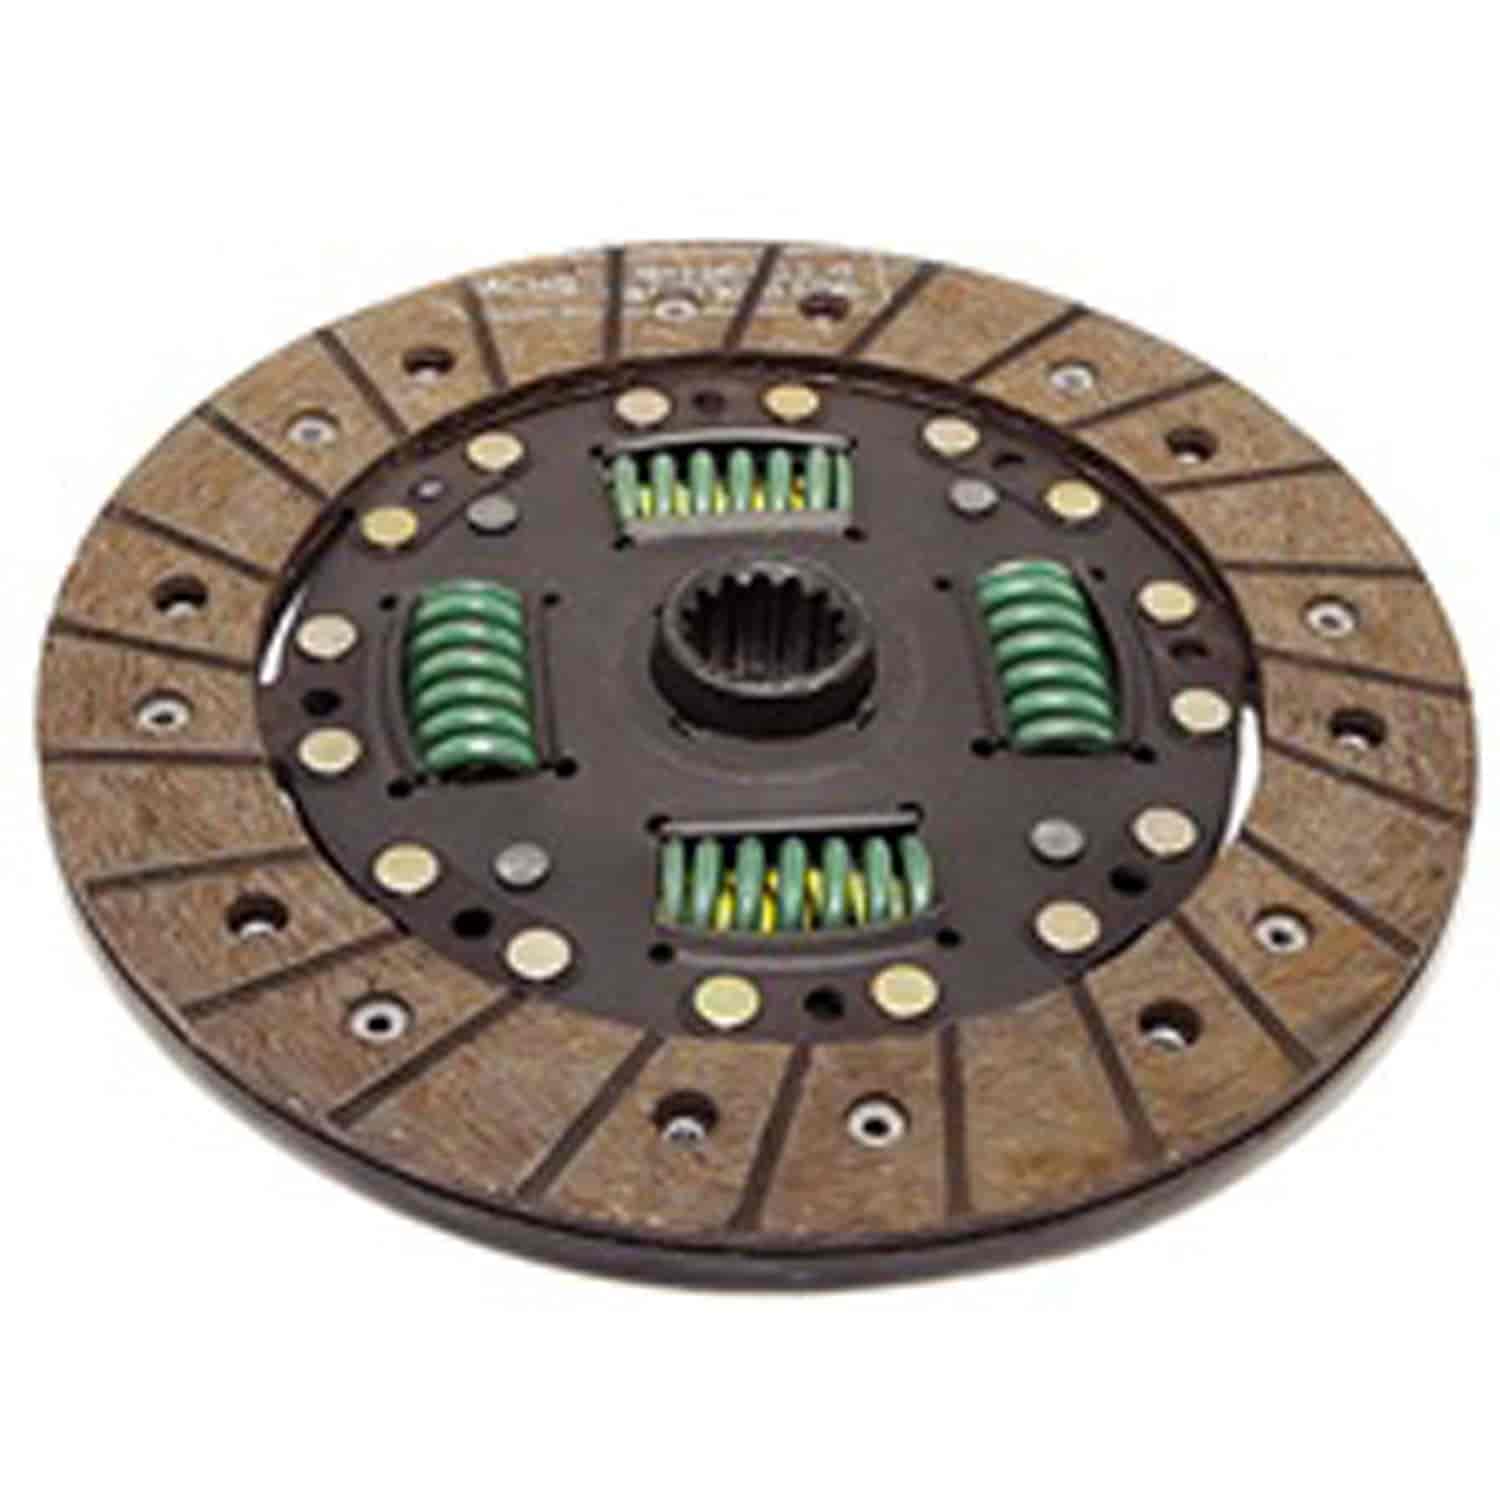 Replacement clutch disc from Omix-ADA, Fits 87-95 Jeep Cherokees with a 2.1L diesel engine.